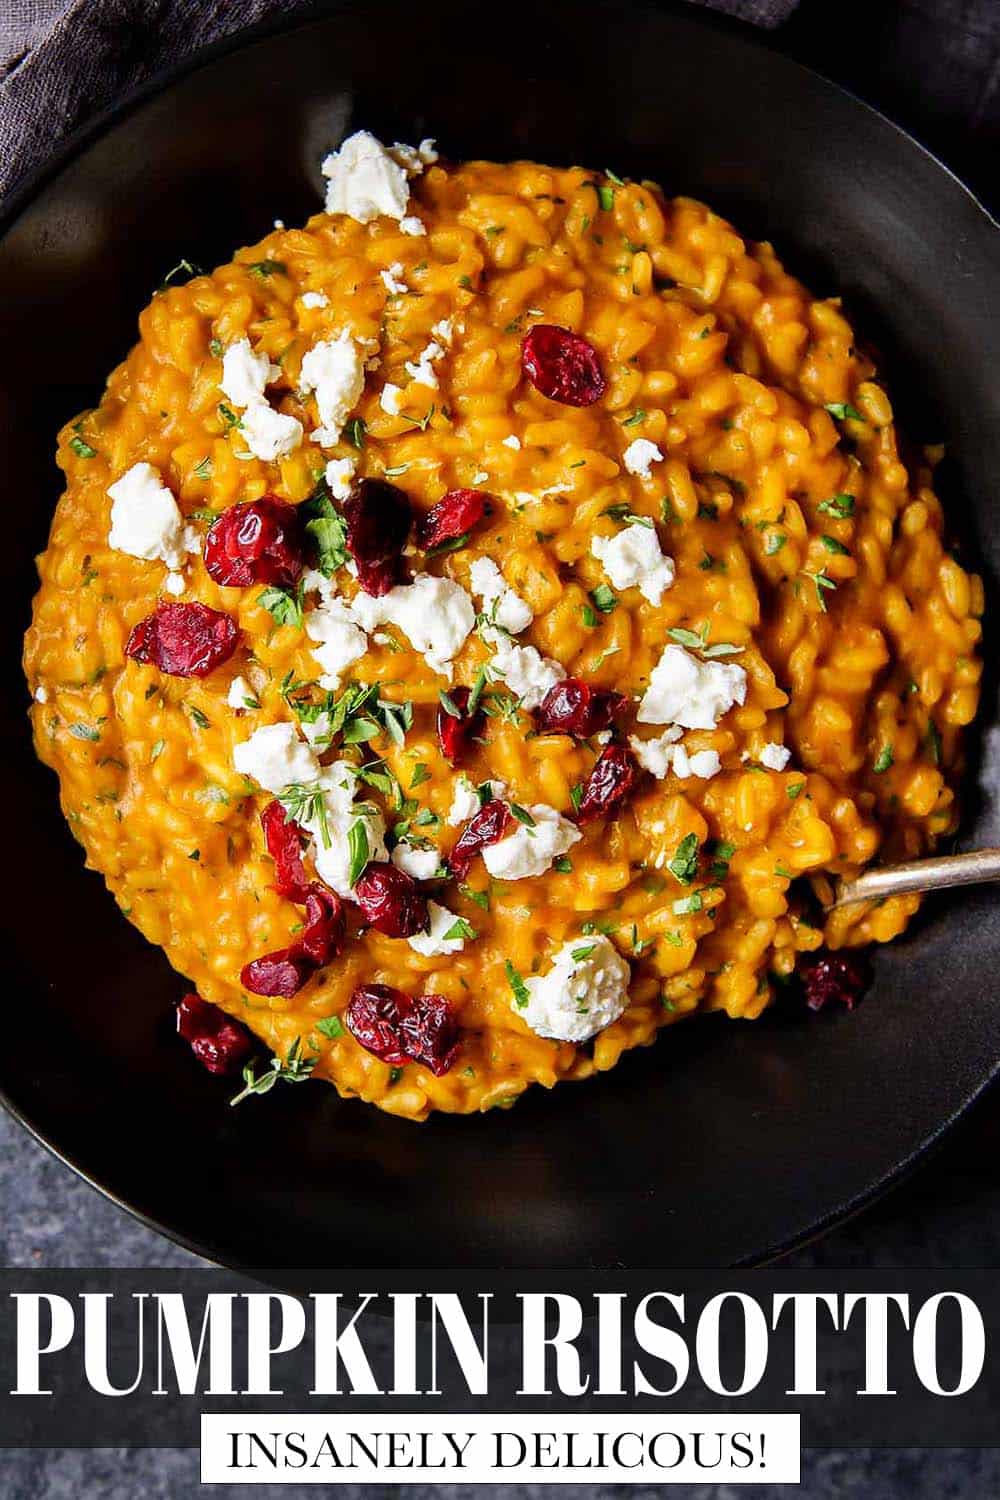 Overhead shot of Pumpkin Risotto with Goat Cheese and Cranberries on top.